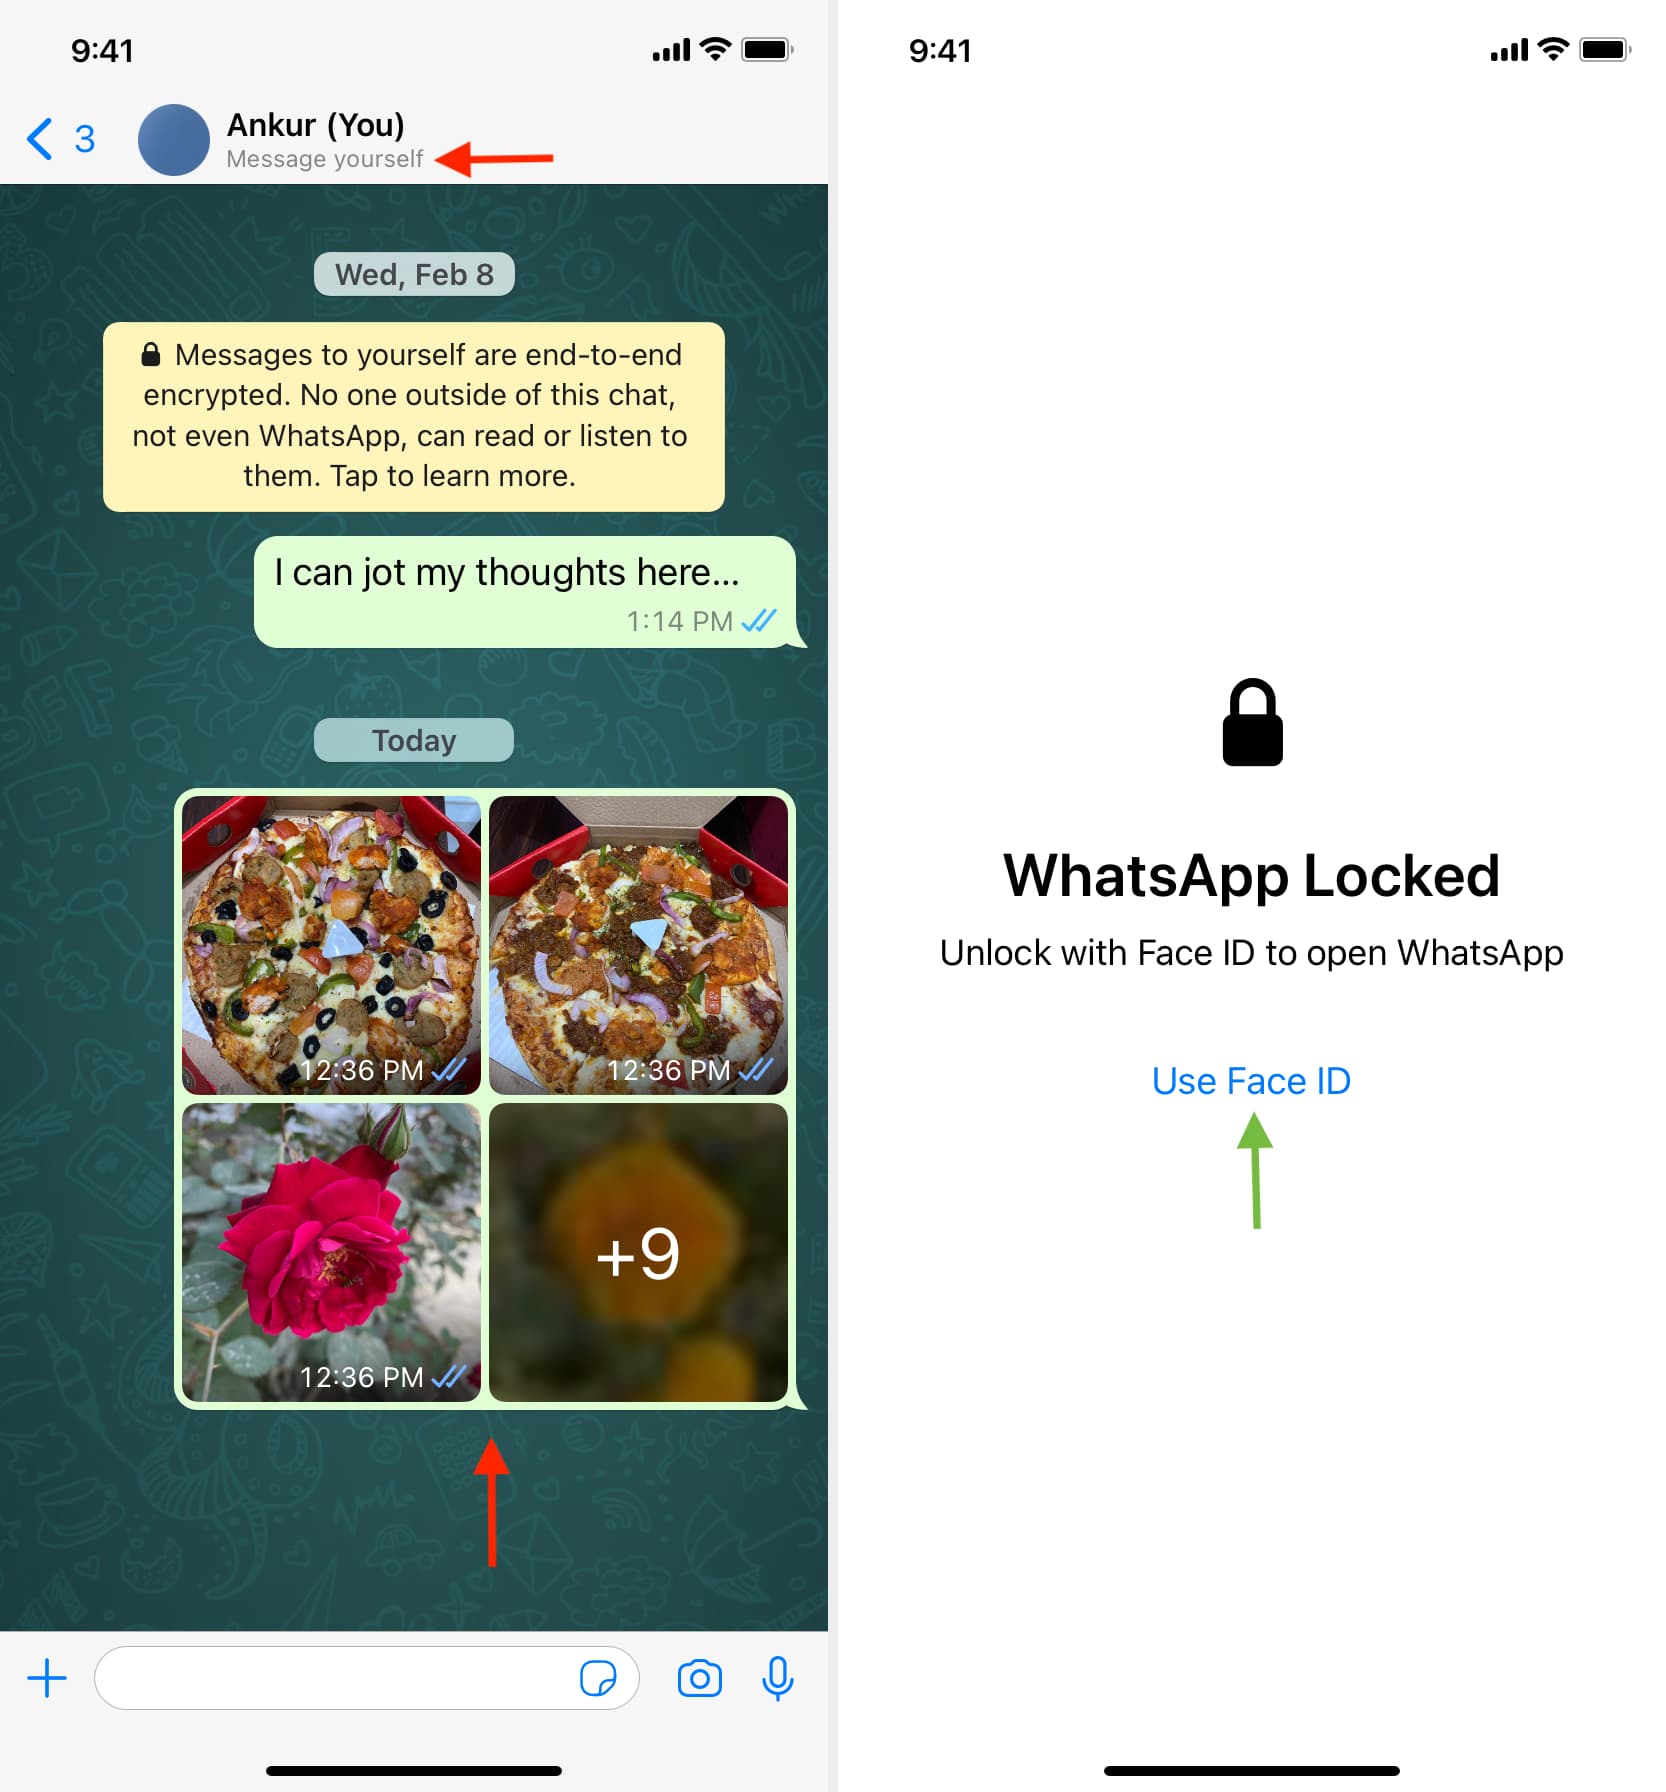 Send photos to yourself on WhatsApp and lock the app on iPhone